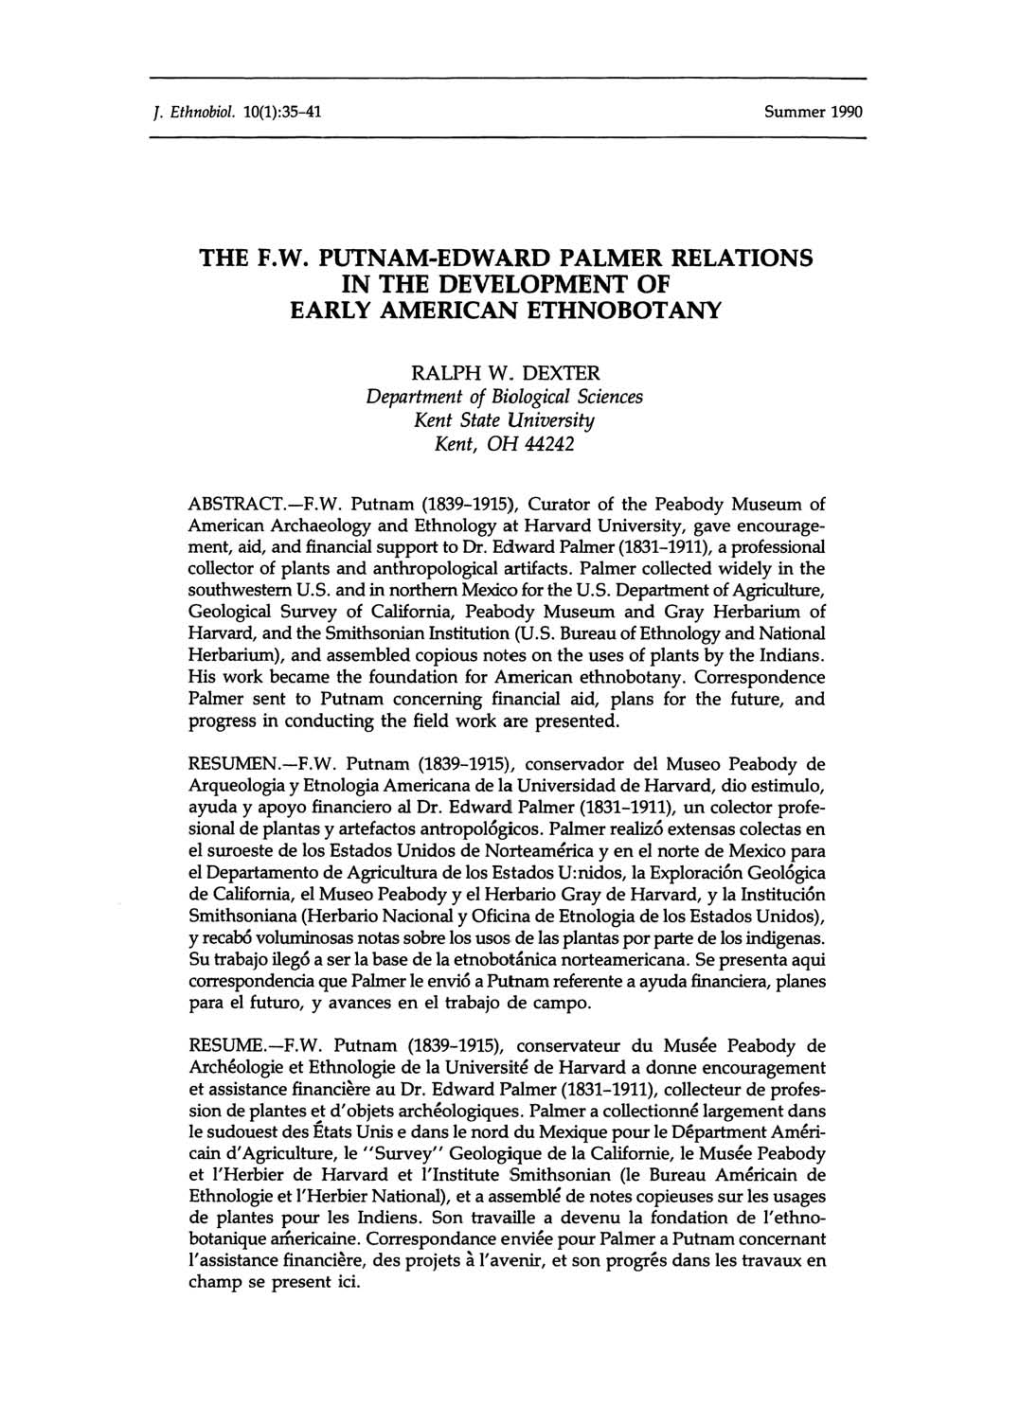 The F.W. Putnam-Edward Palmer Relations in the Development of Early American Ethnobotany